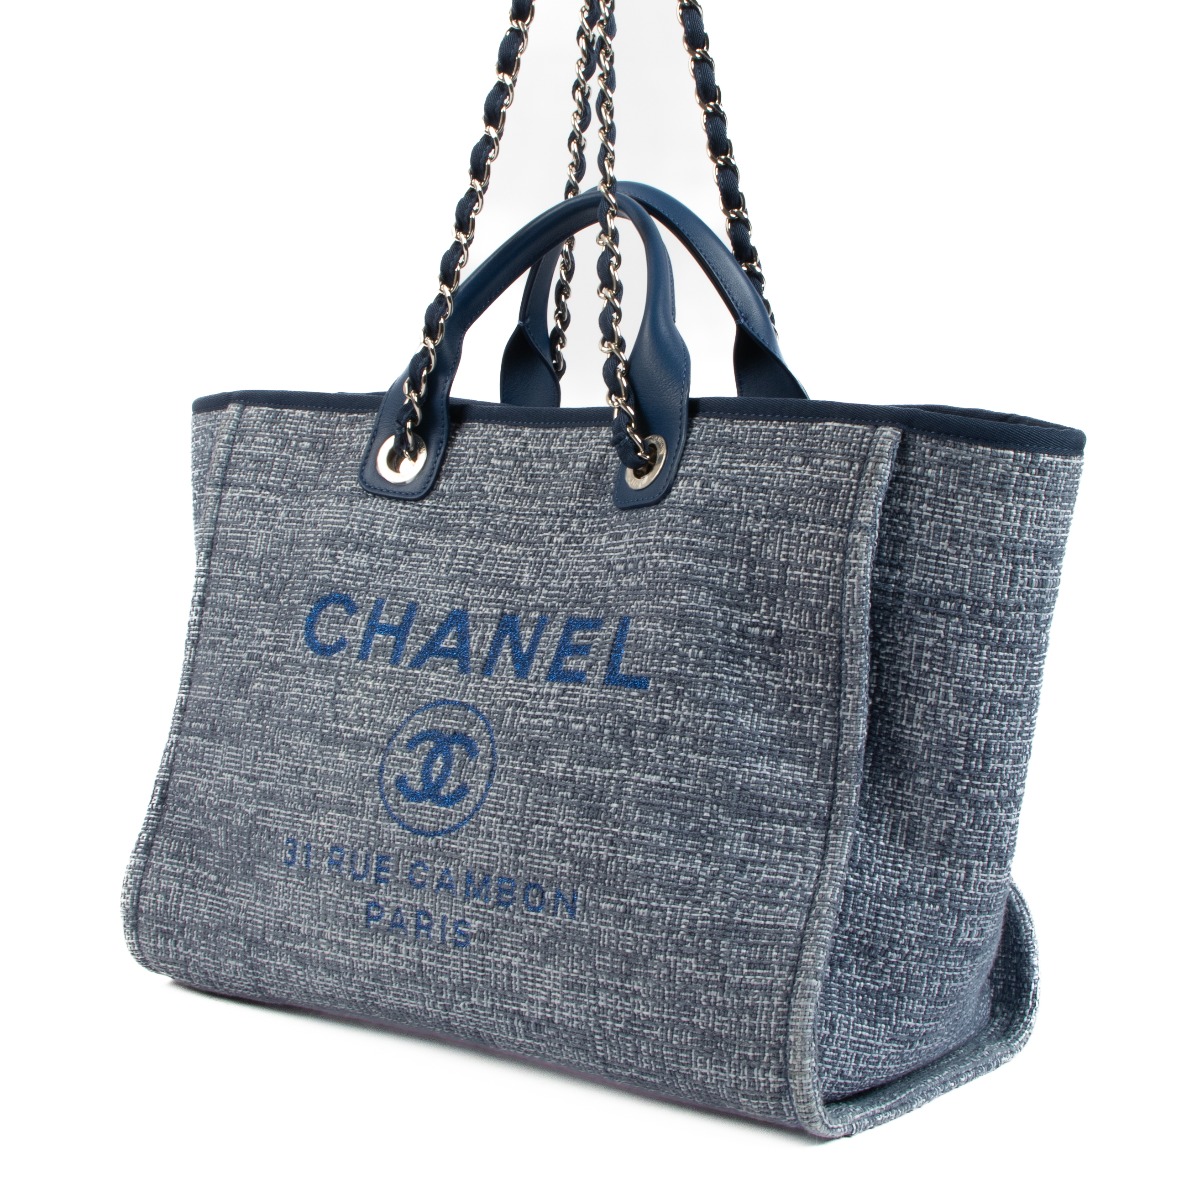 Chanel Deauville Tote Canvas with Striped Detail Large